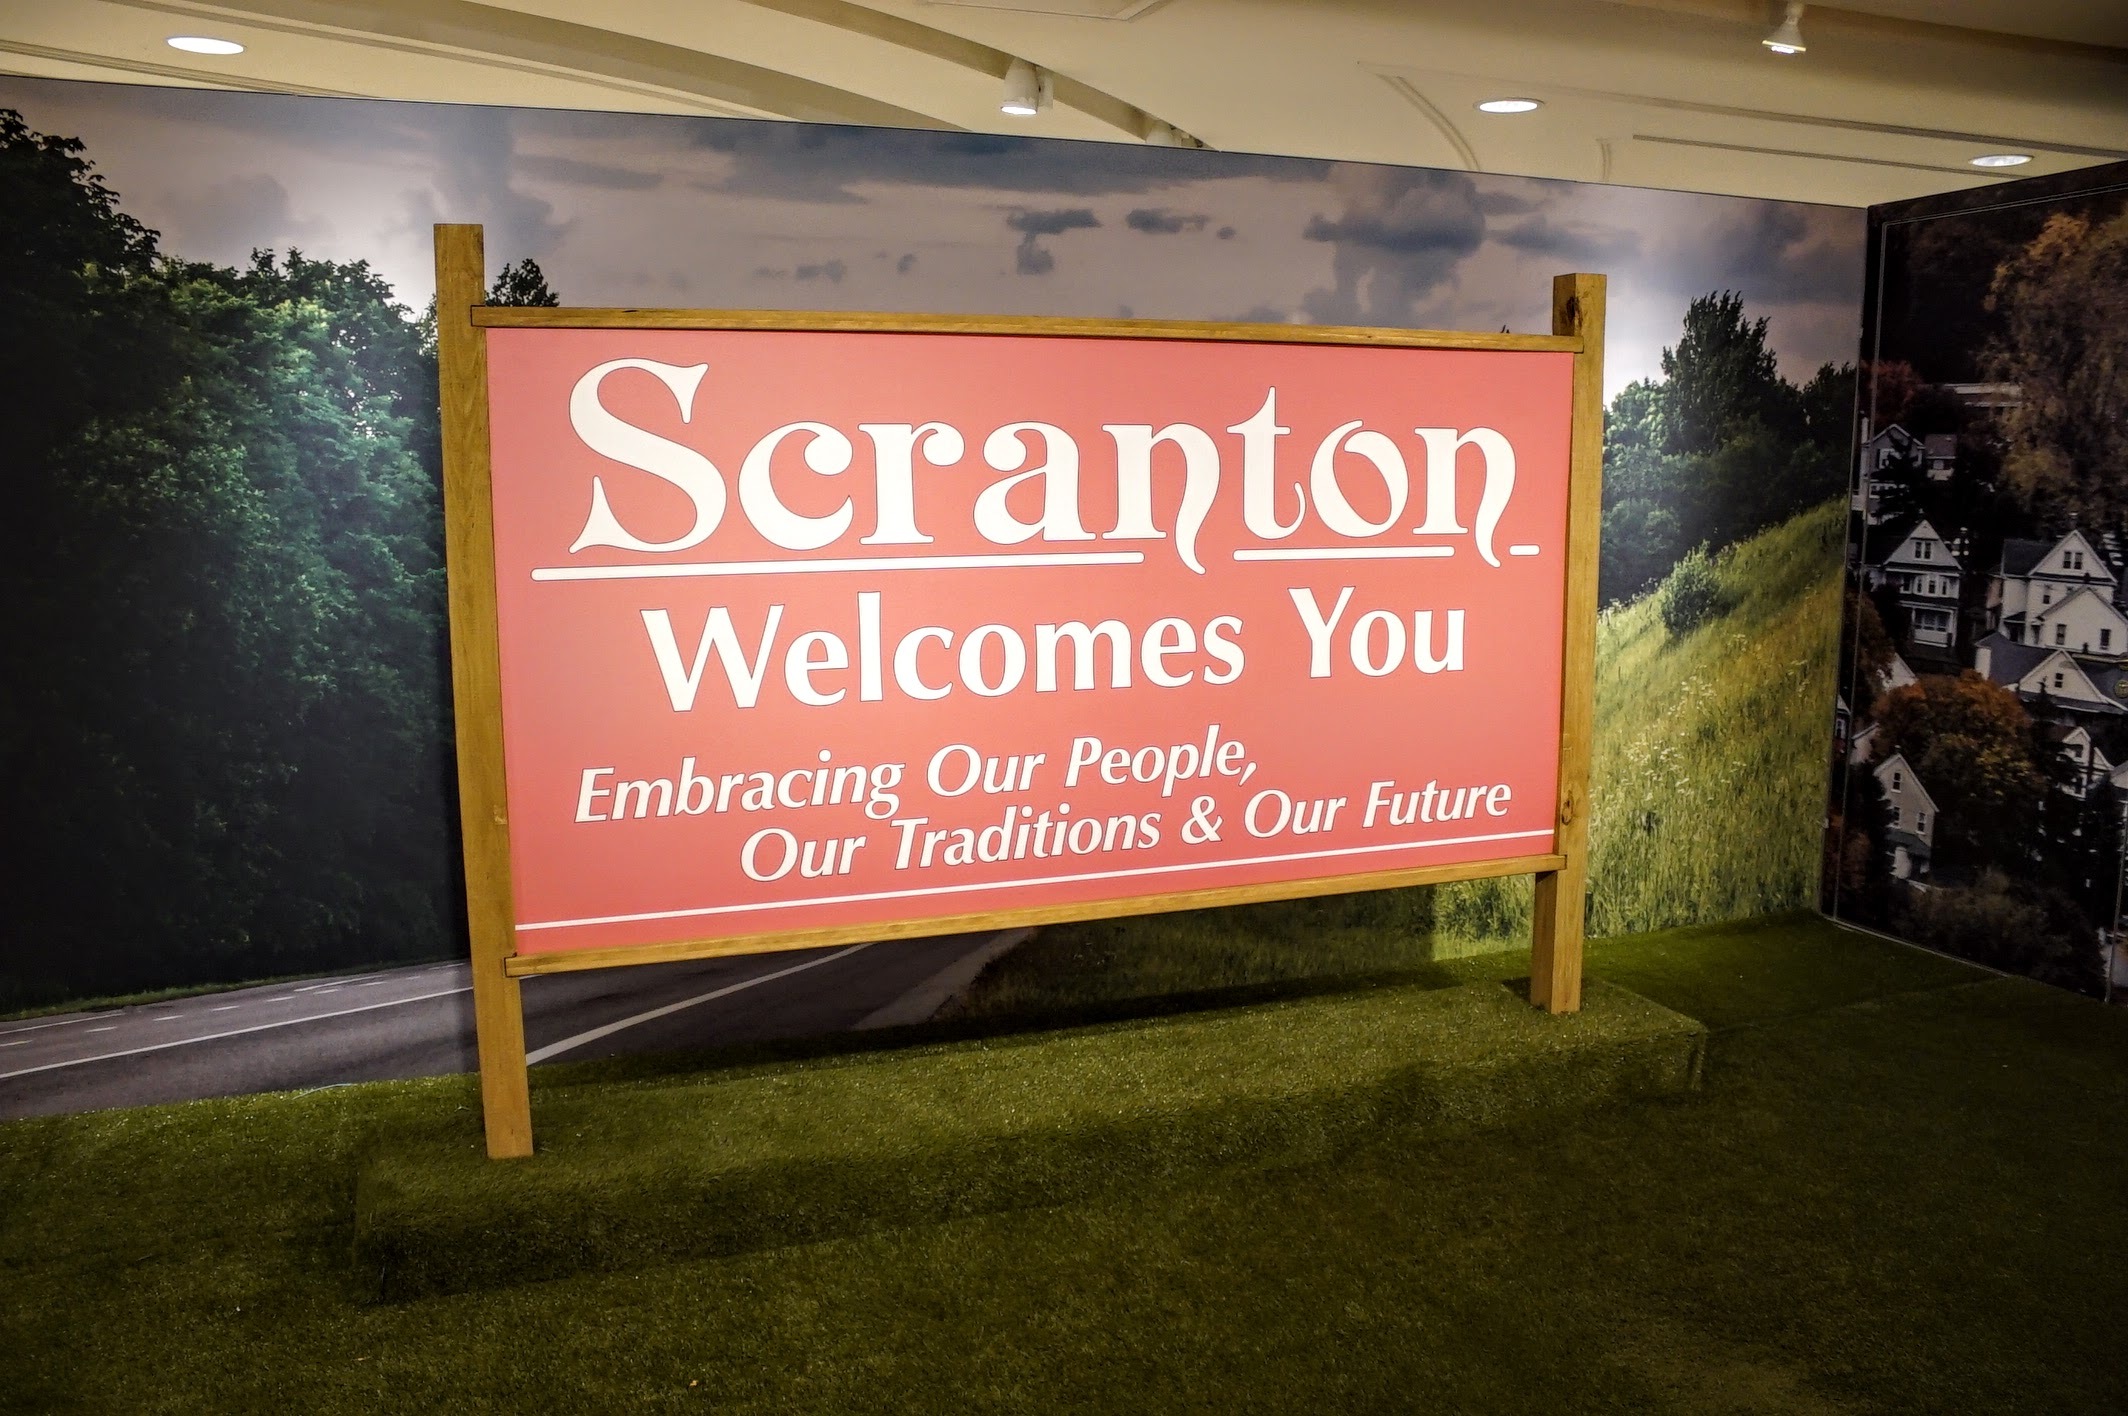 The Office Experience brings Scranton to Chicago - Axios Chicago